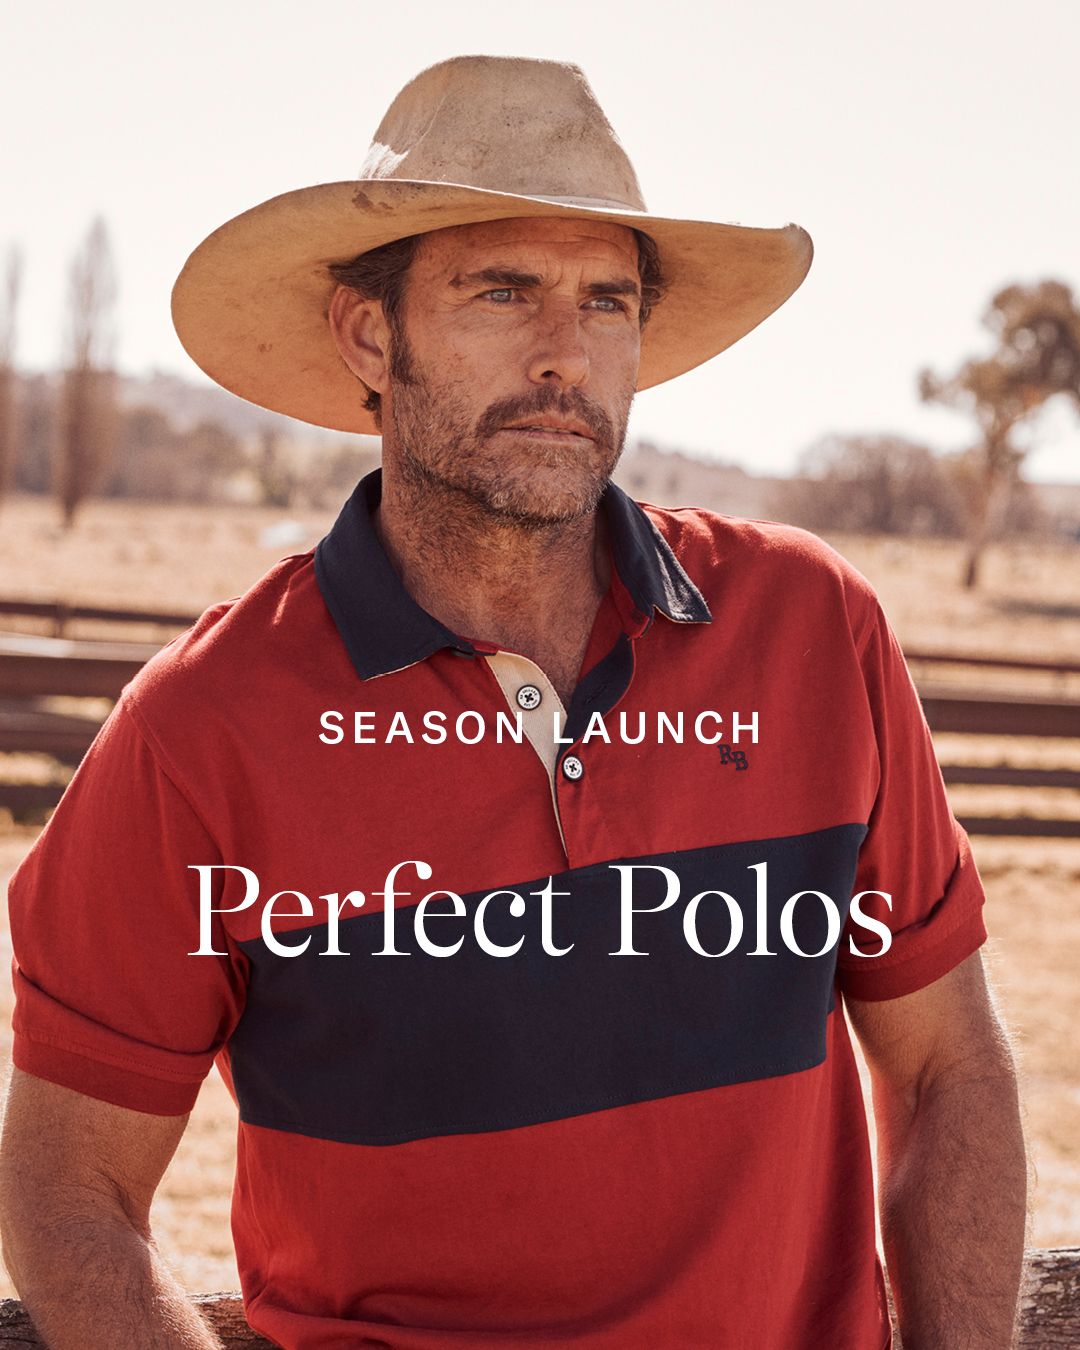 New Season | Perfect Polos

Our polos are a customer favourite for a...

Shop Men's New Arrival Polos via the link in bio. 

#RBSellars